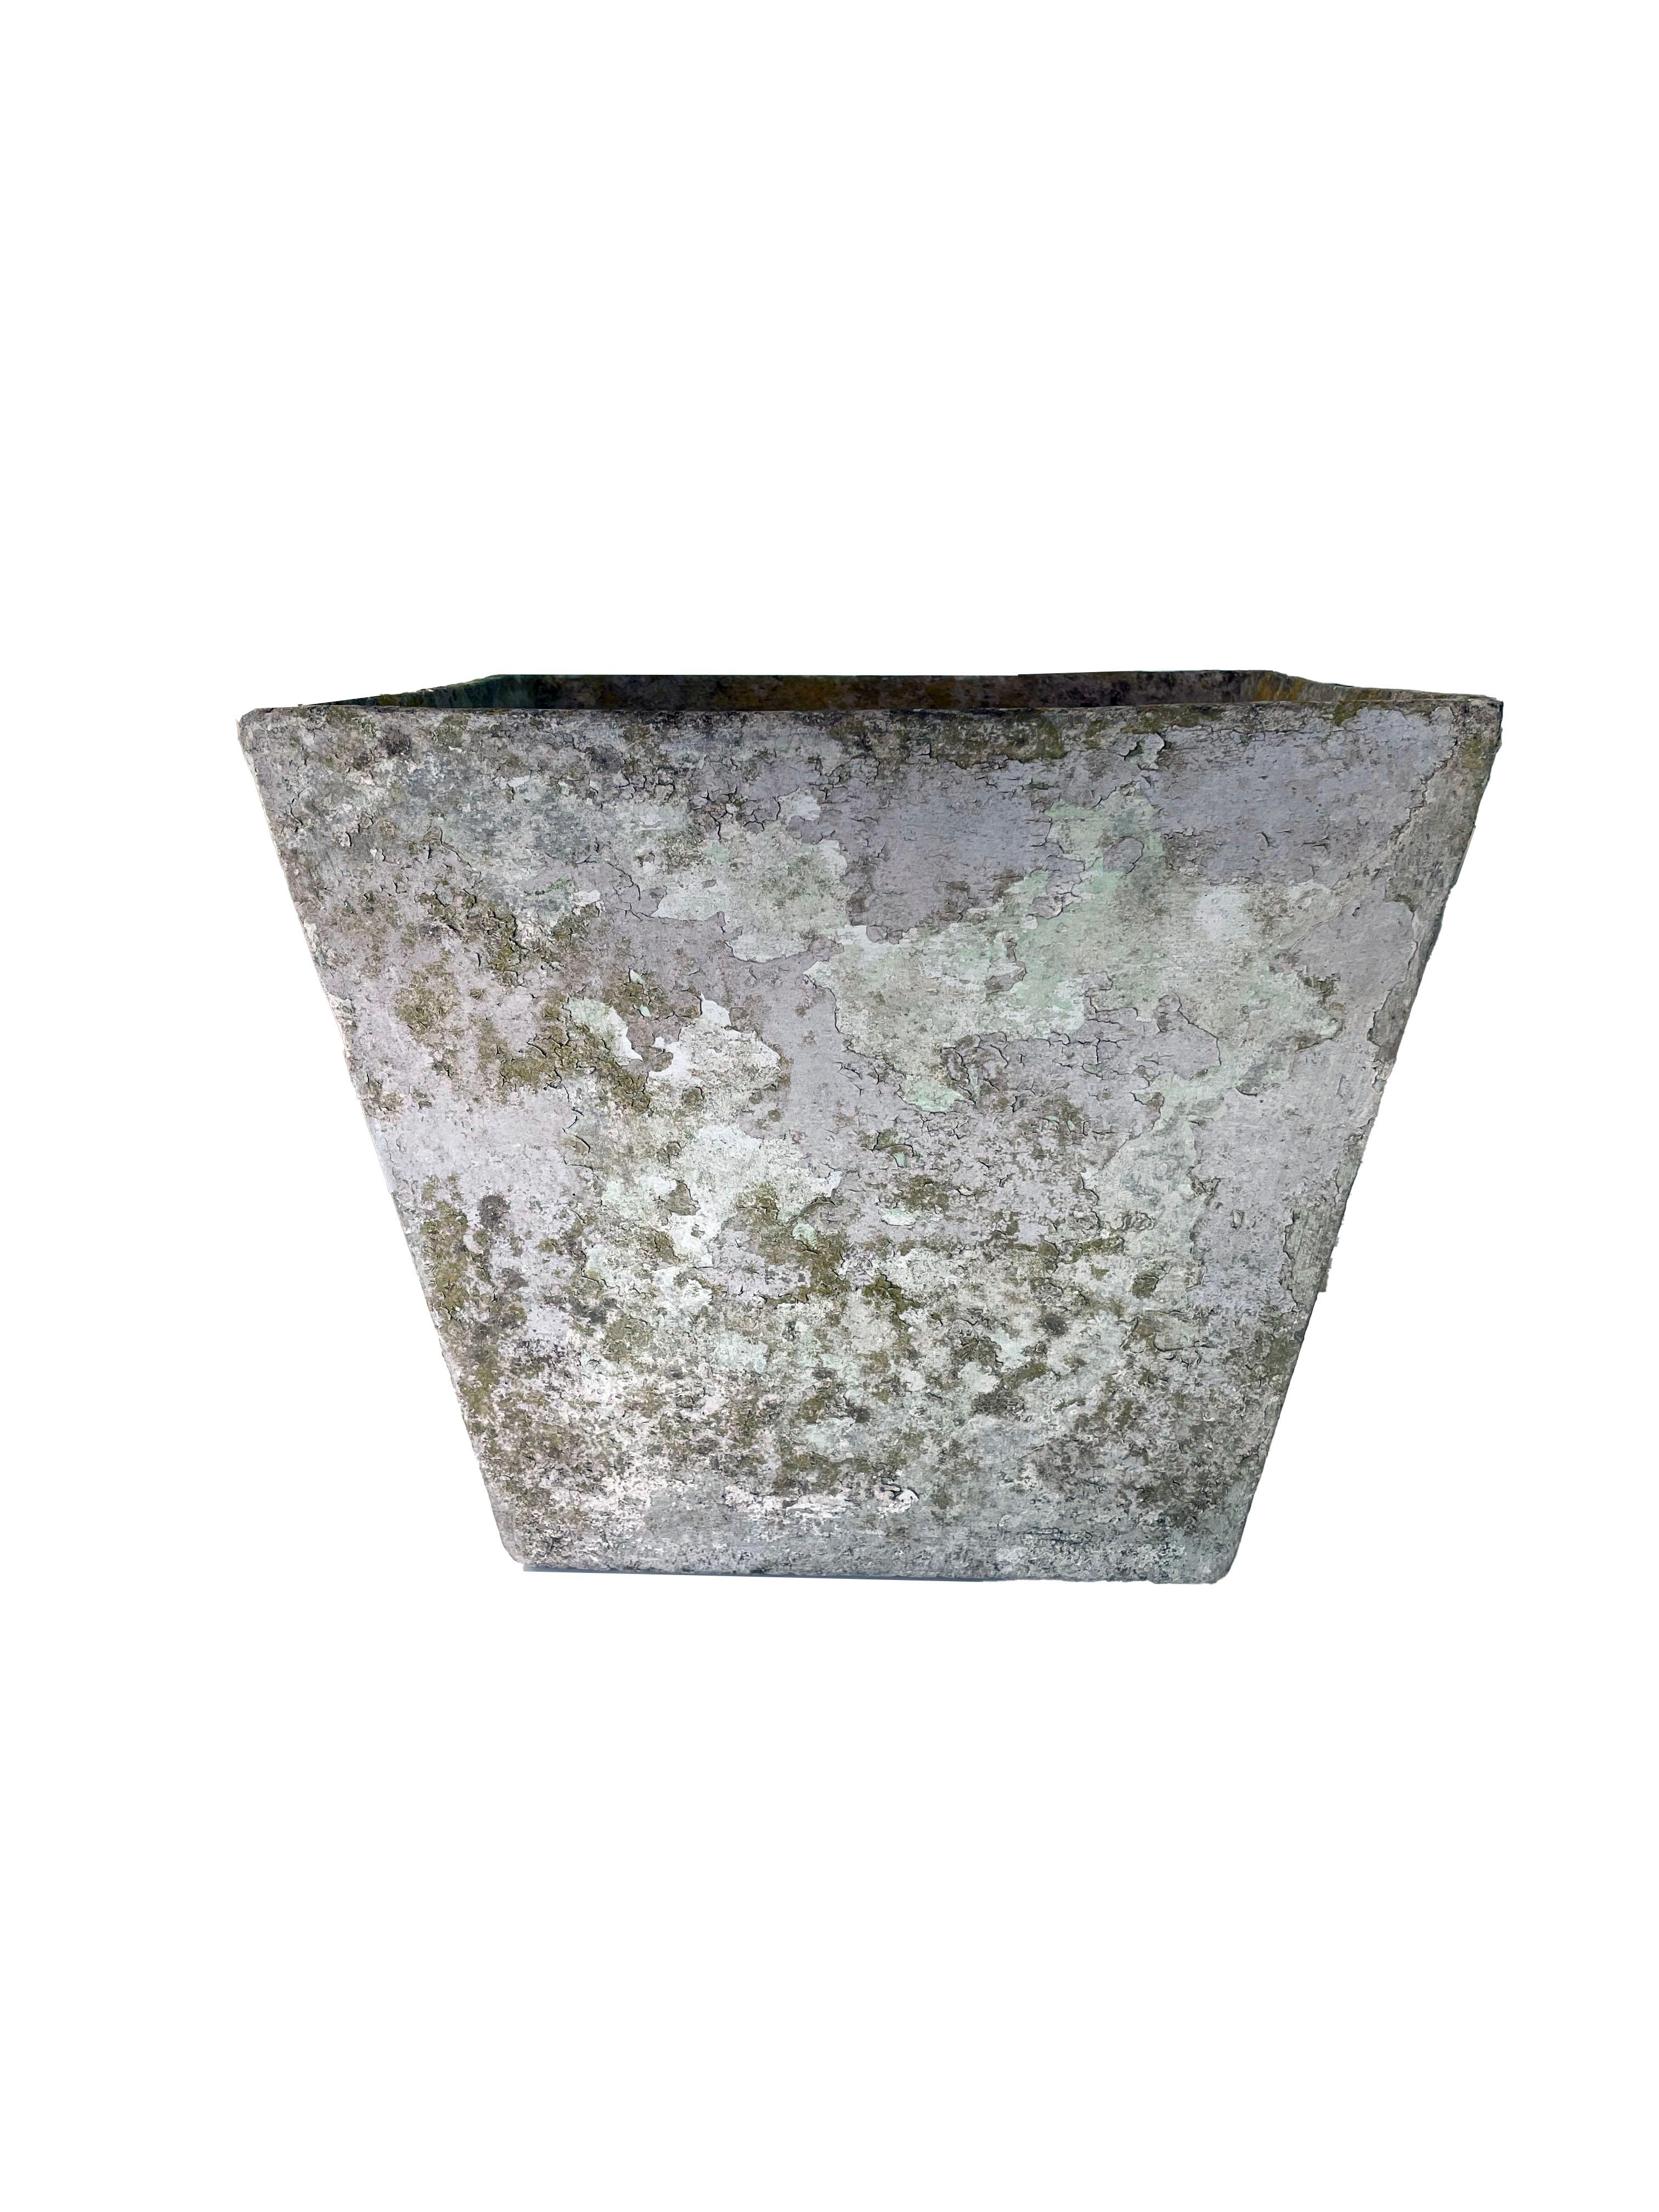 Trapezoid Willy Guhl Planter, two available  For Sale 4